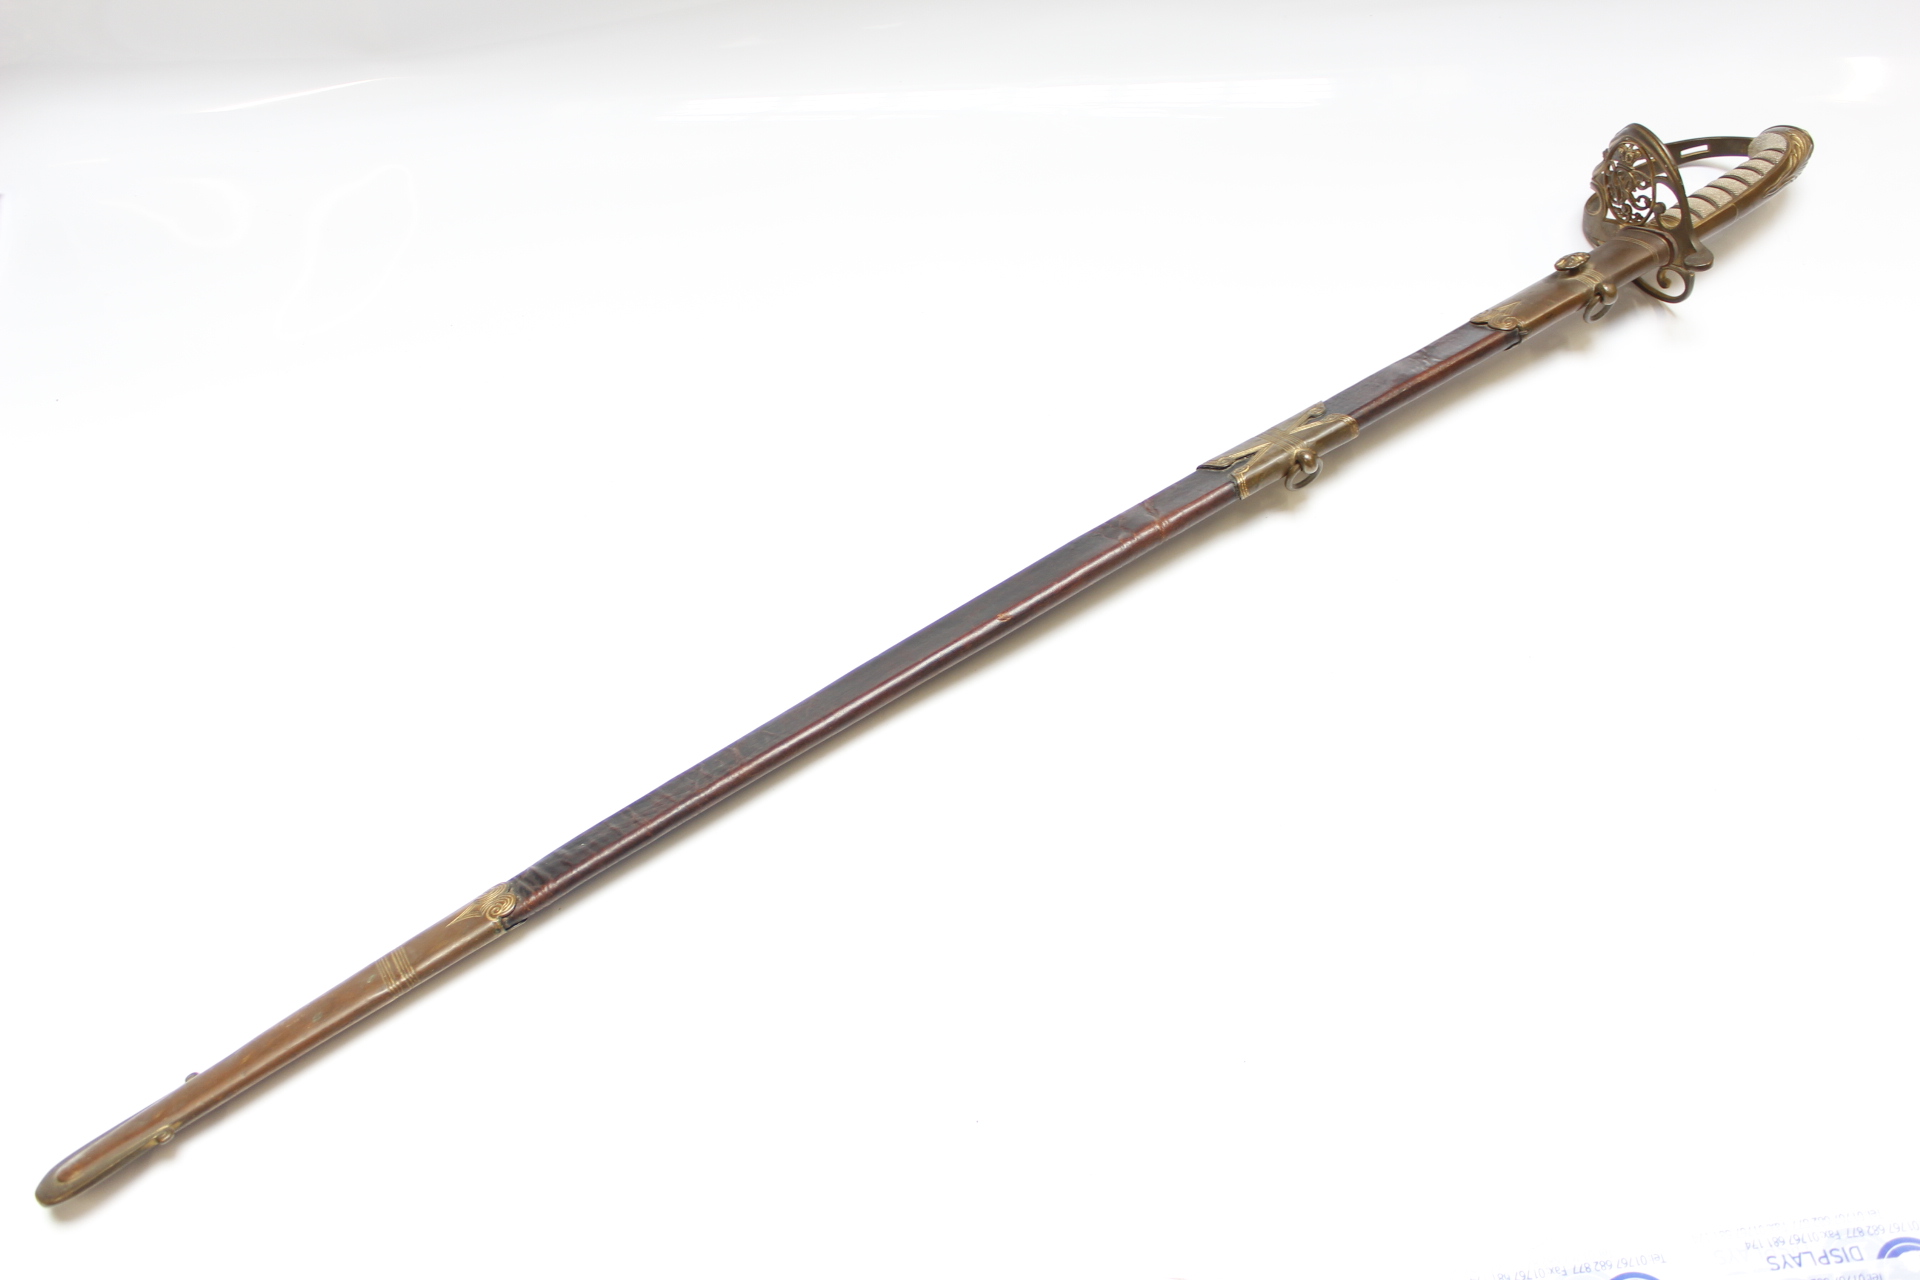 British Pattern 1822 Officer's sword, 32½ ins slightly curved fullered blade by Doland & Co., the bl - Image 7 of 8